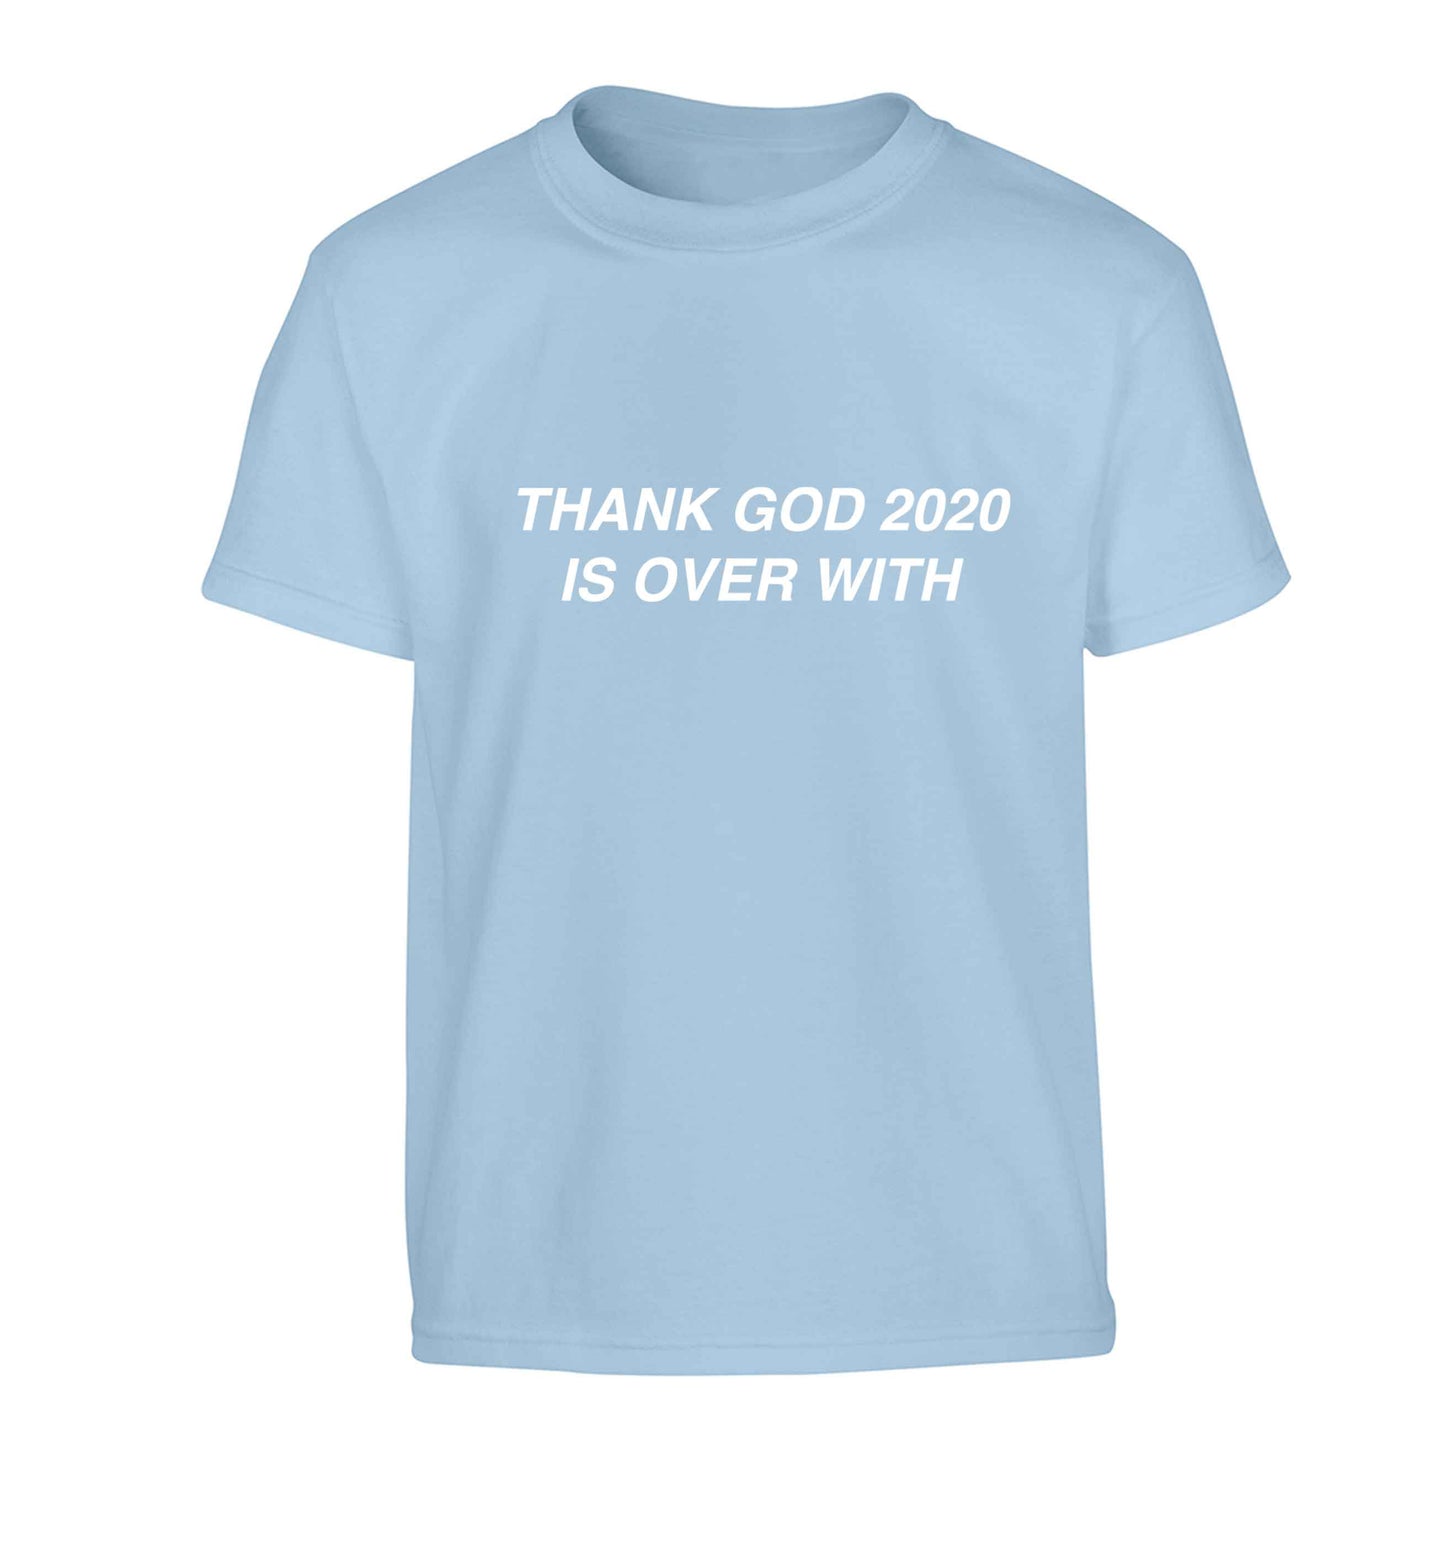 Thank god 2020 is over with Children's light blue Tshirt 12-13 Years